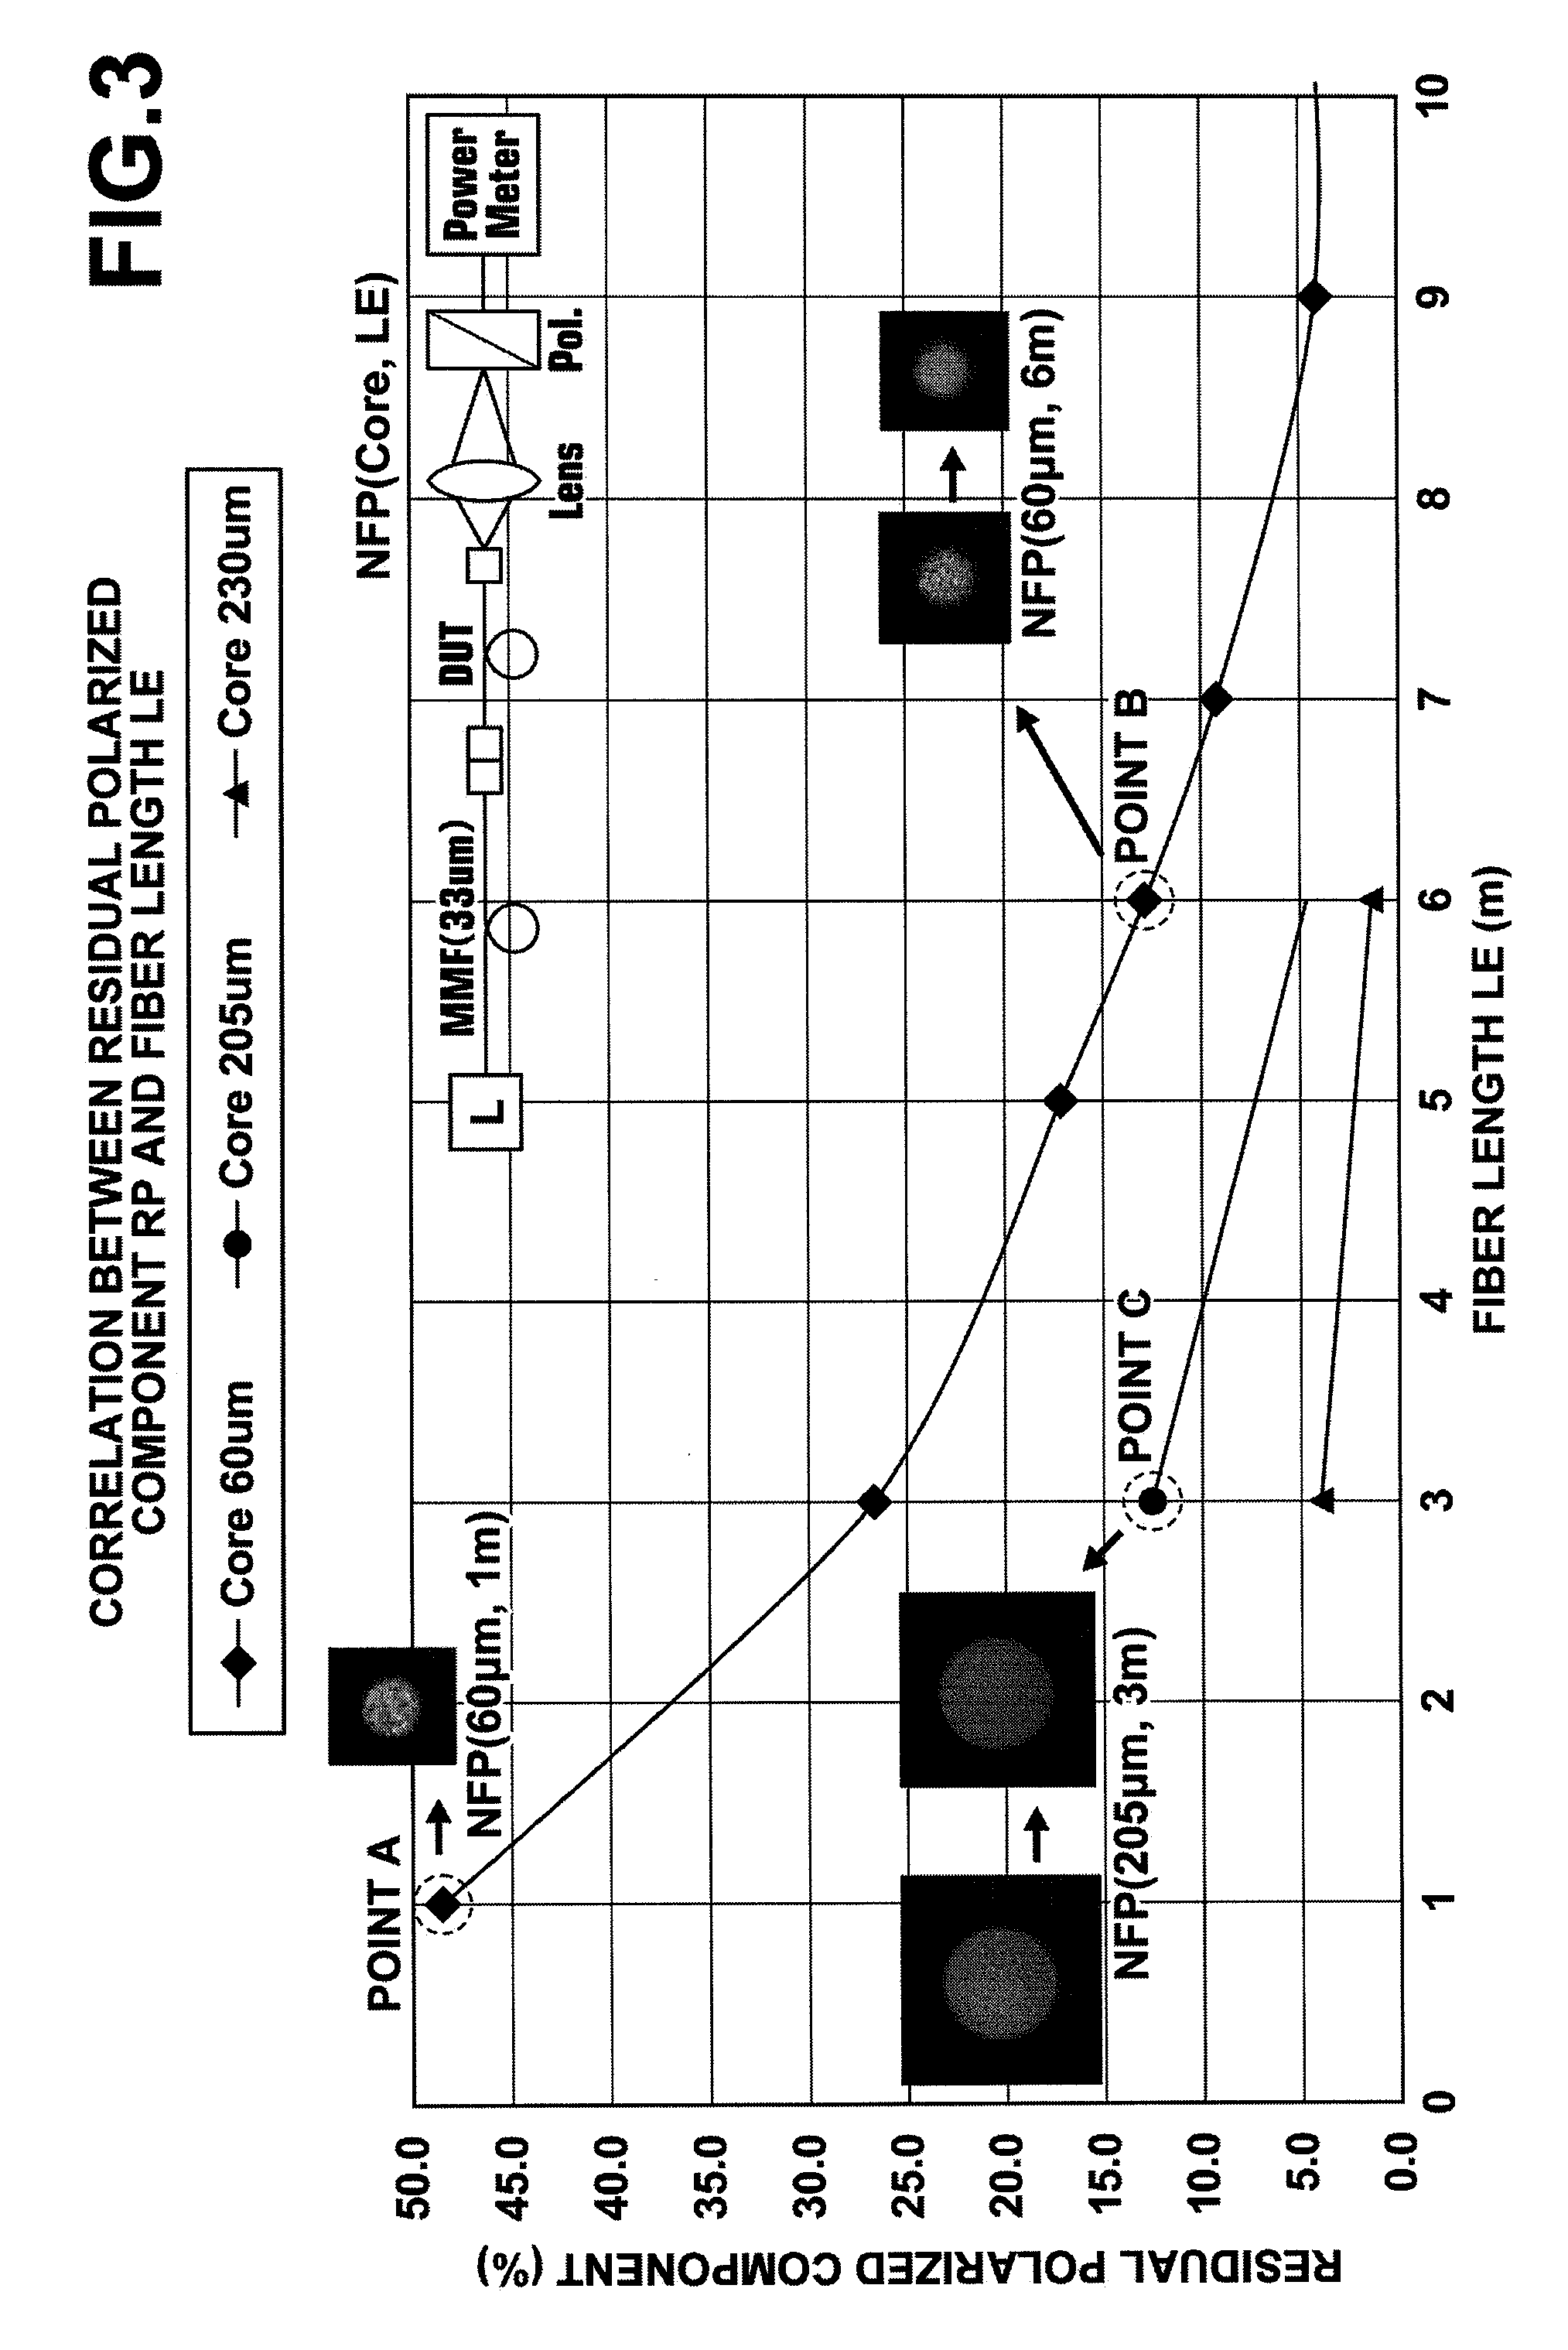 Low-speckle light source device